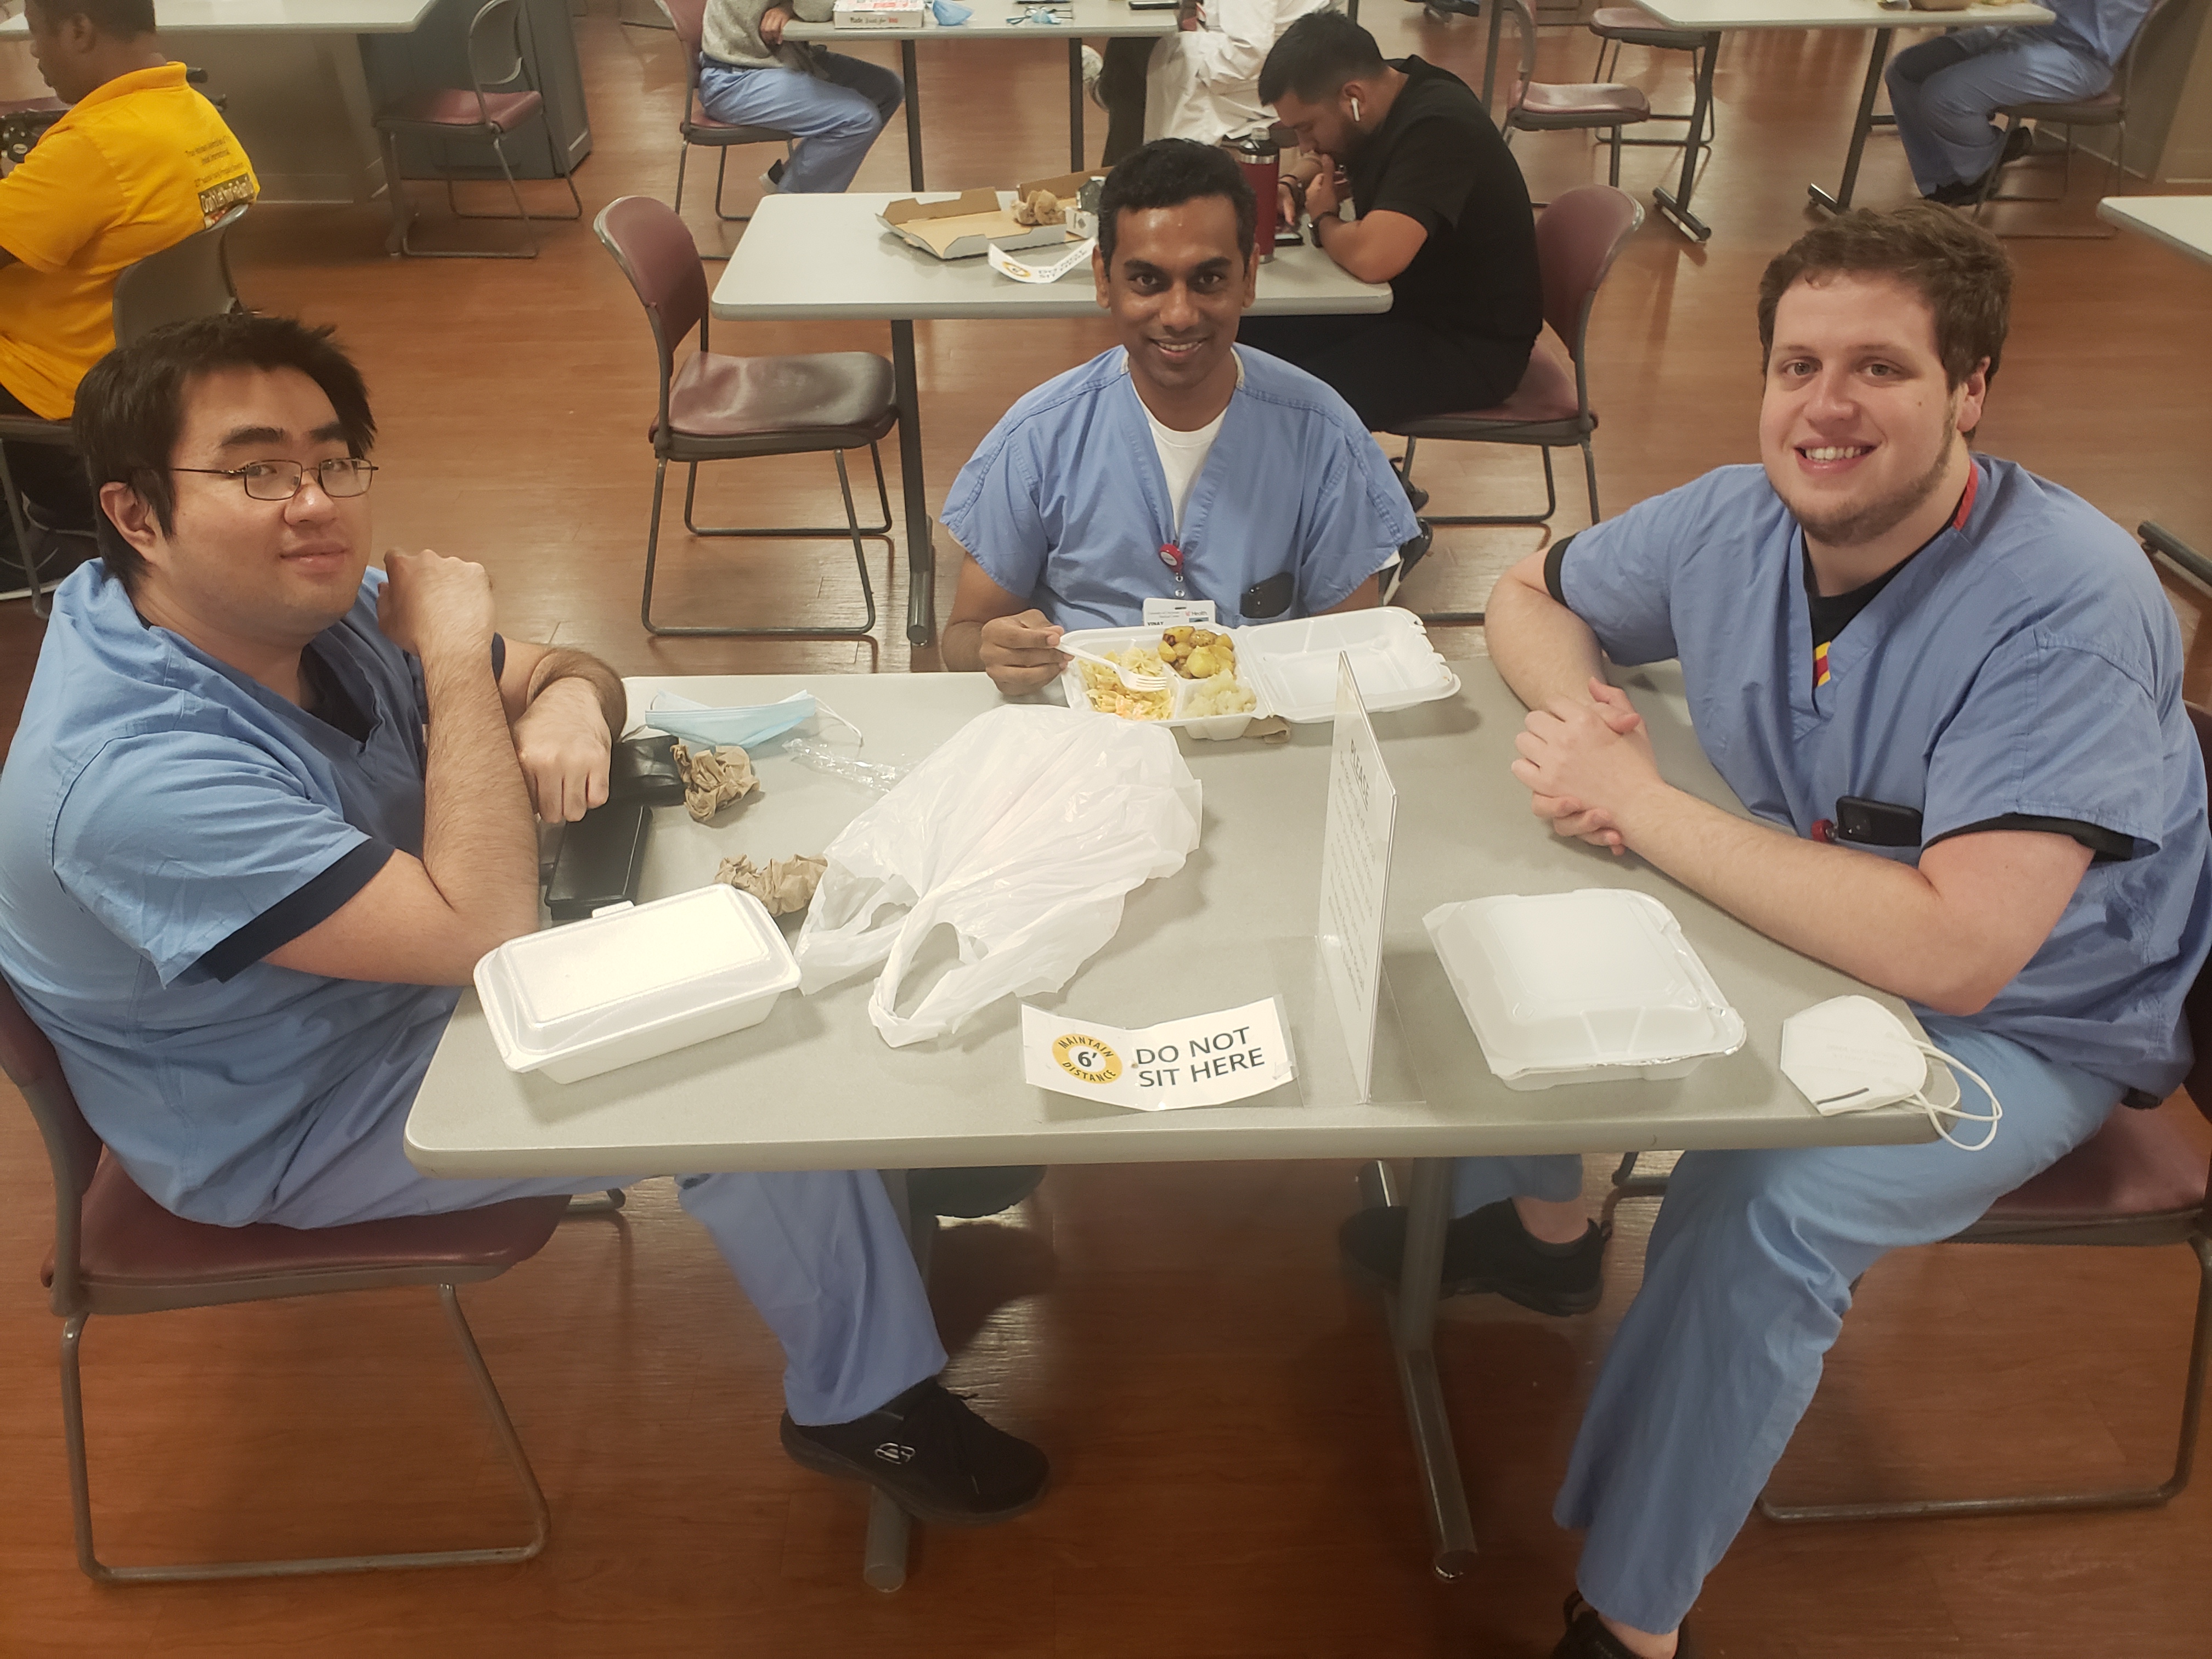 Three PGY2 Residents at Lunch in Cafeteria